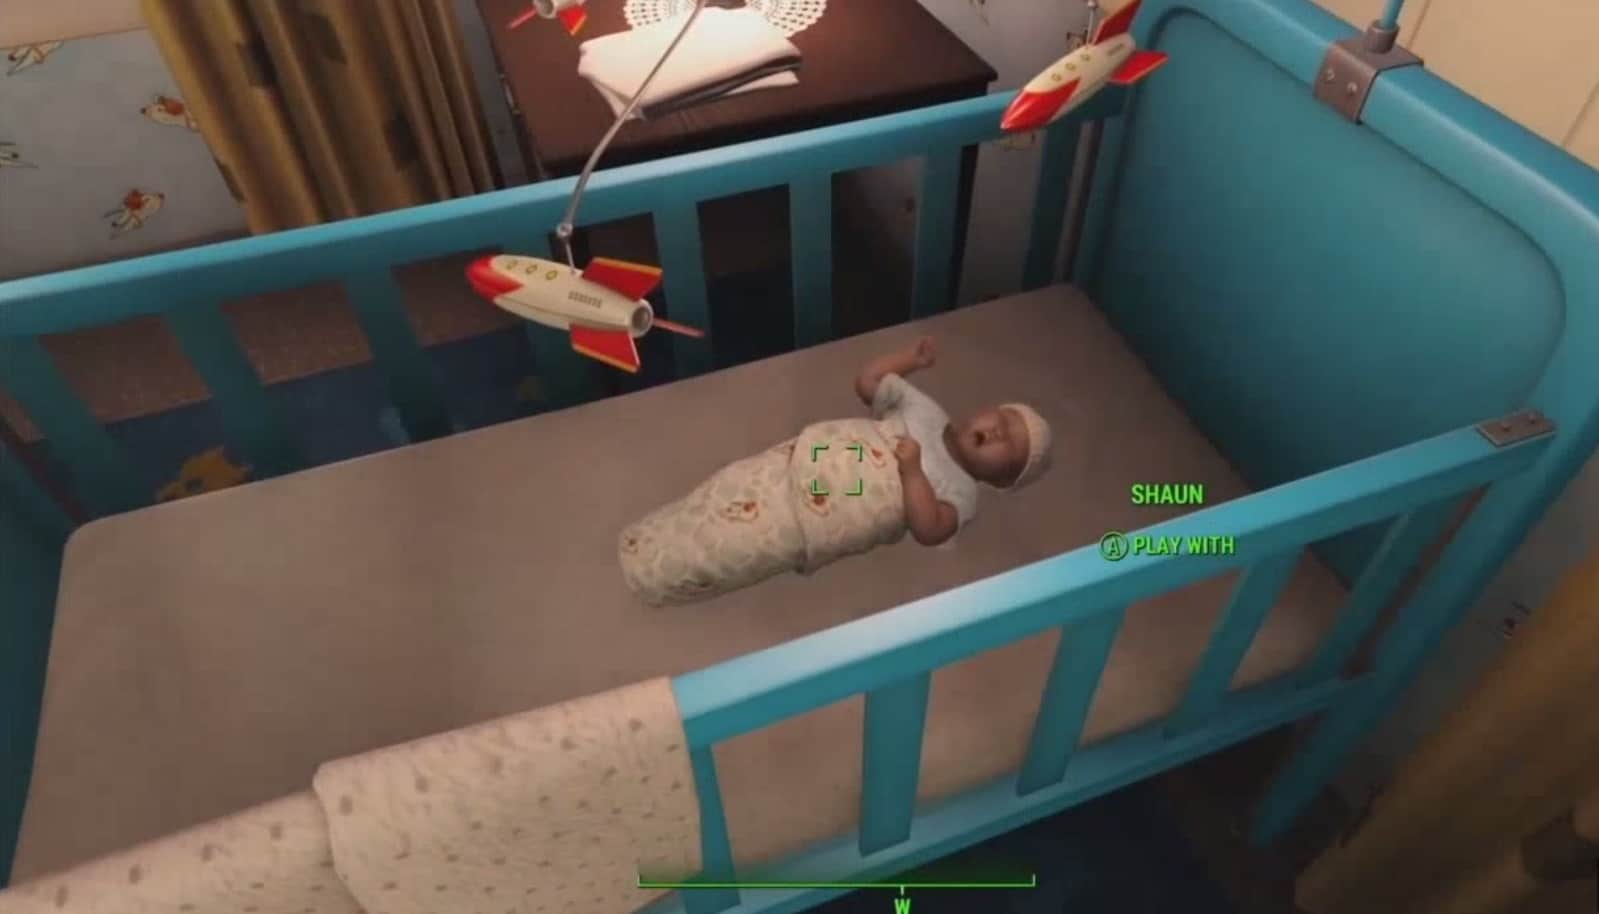 Fallout 4 Baby In Crib Xbox One PS4 PC Gameplay Screenshot